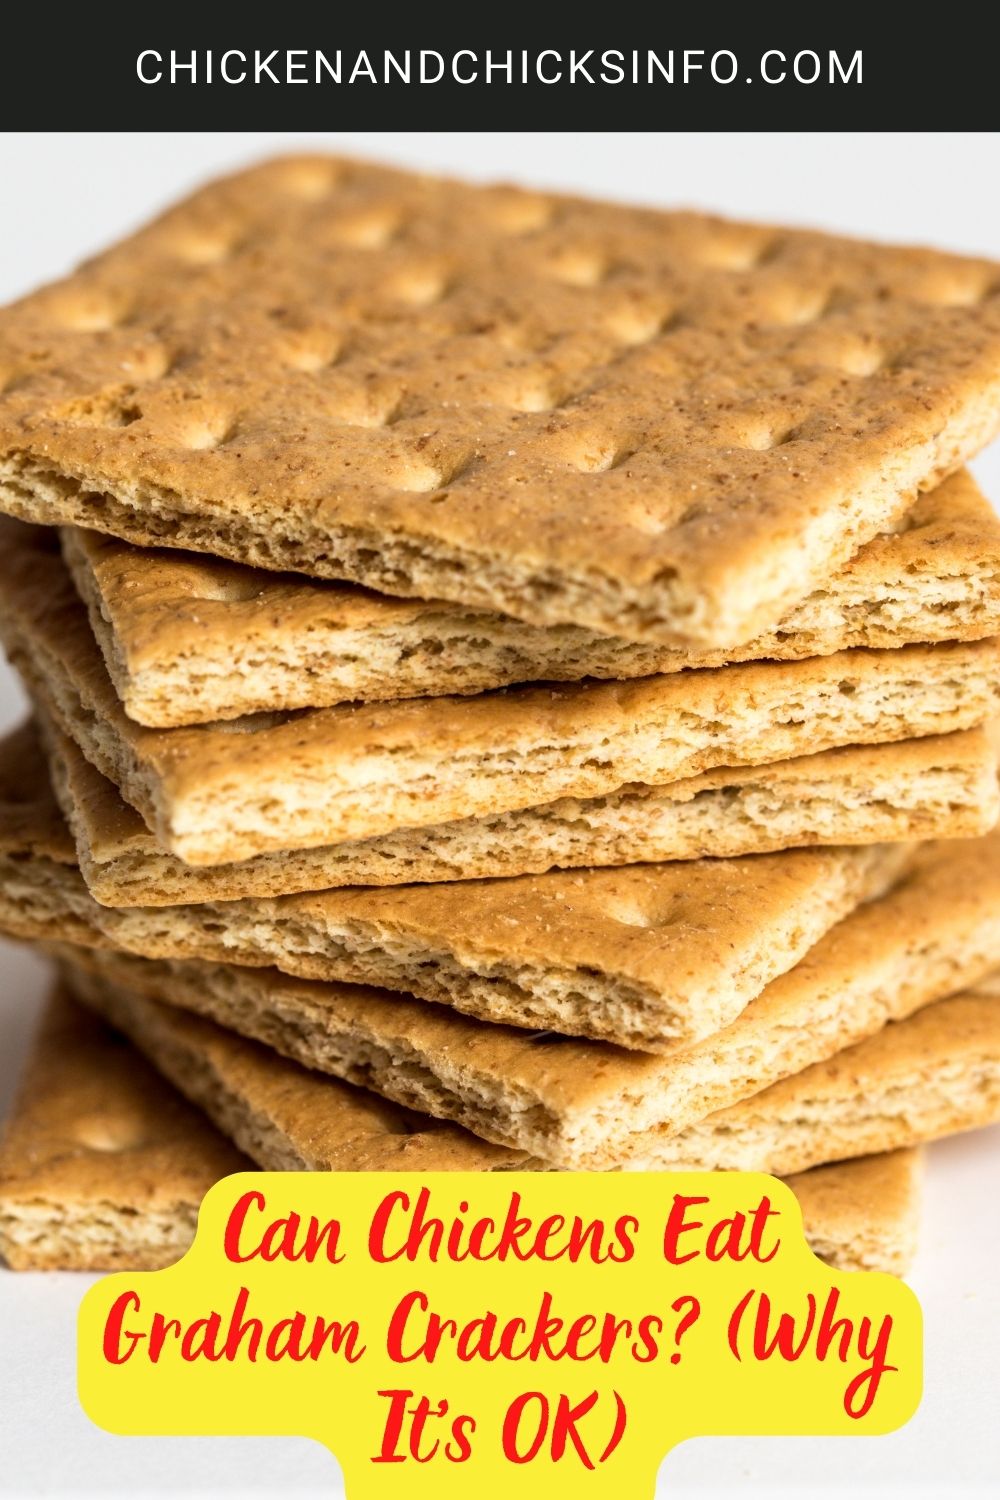 Can Chickens Eat Graham Crackers? (Why It's OK) poster.
